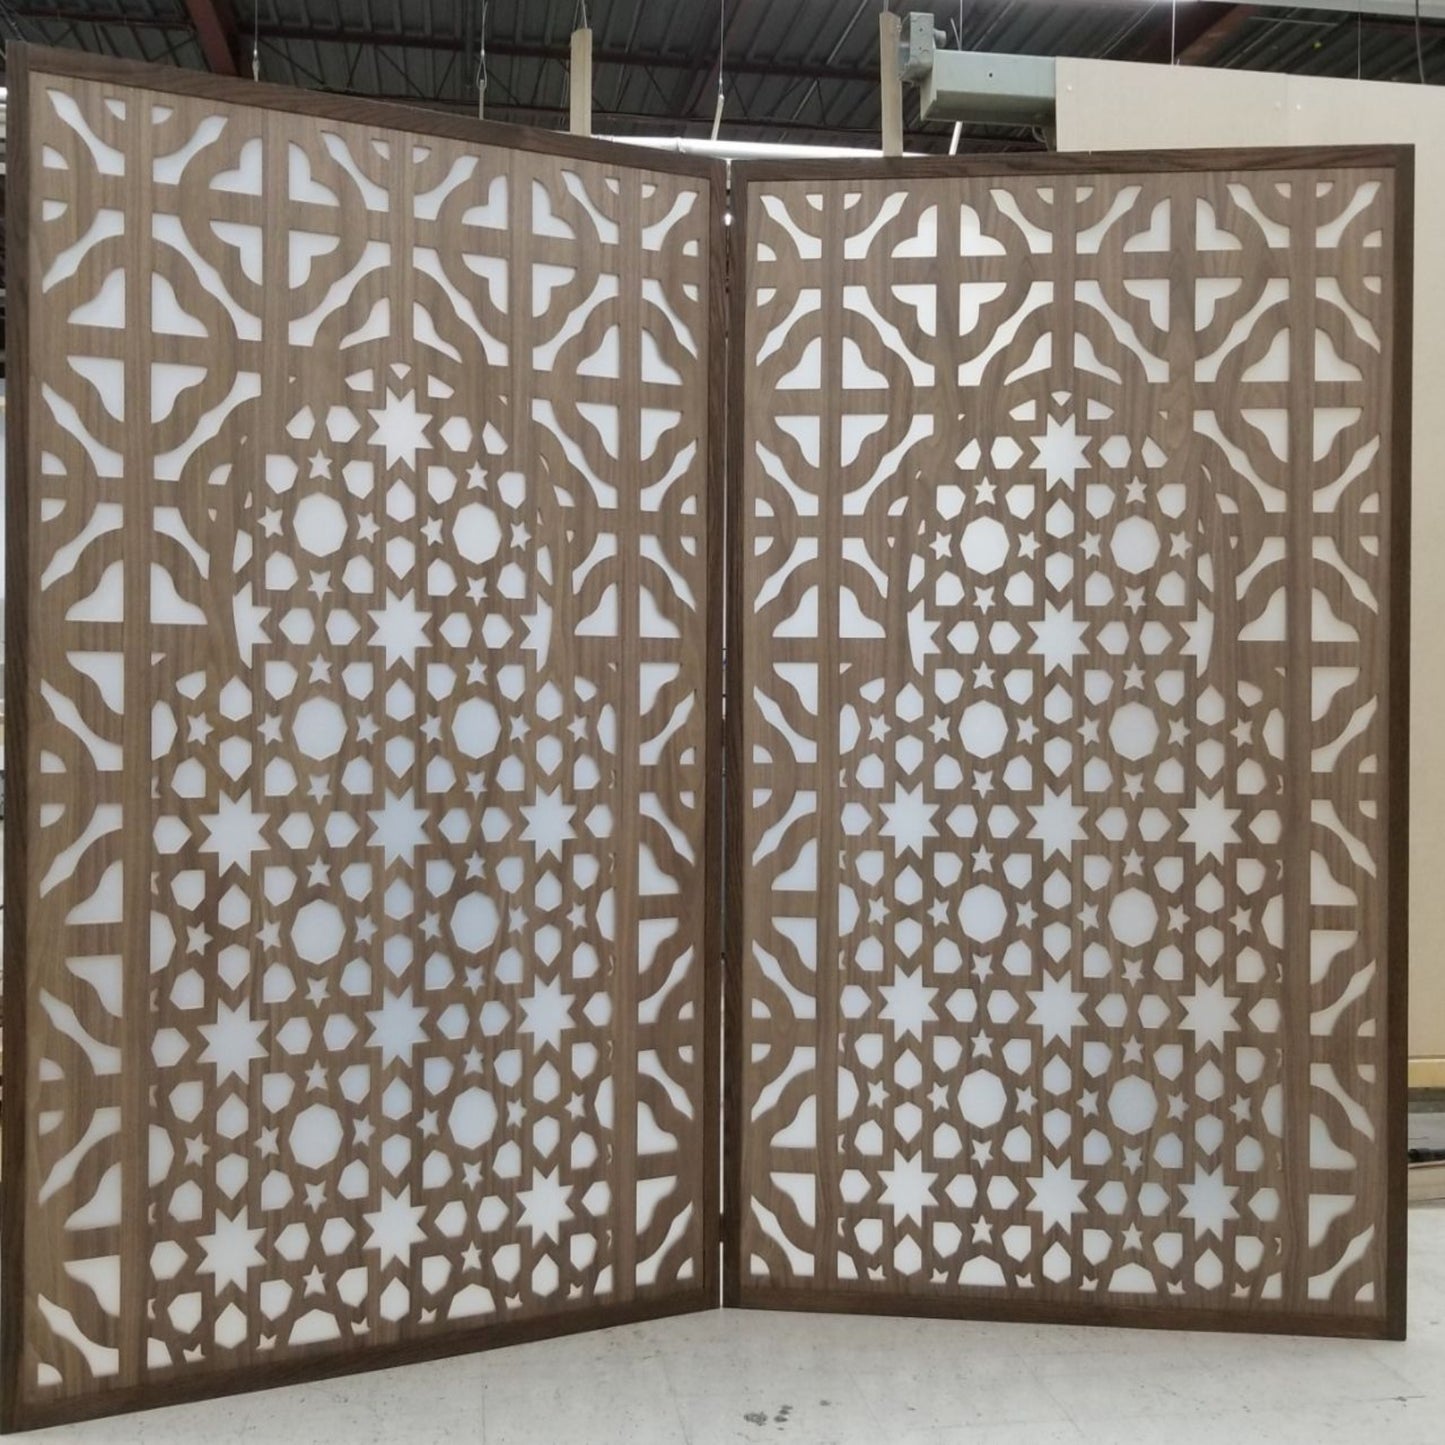 Room divider with translucent sheet, Custom Pattern Room divider, Room partition, Custom Folding Divider, Easy DIY room divider, room divider idea, movable wall, acoustic panel, floor- to ceiling shelf, bookcase room divider, mid-century room divider, blackout curtain, ceiling partition, smart room divider, wooden room divider, shutter divider, curved ceiling curtain, ceiling acoustic room divider